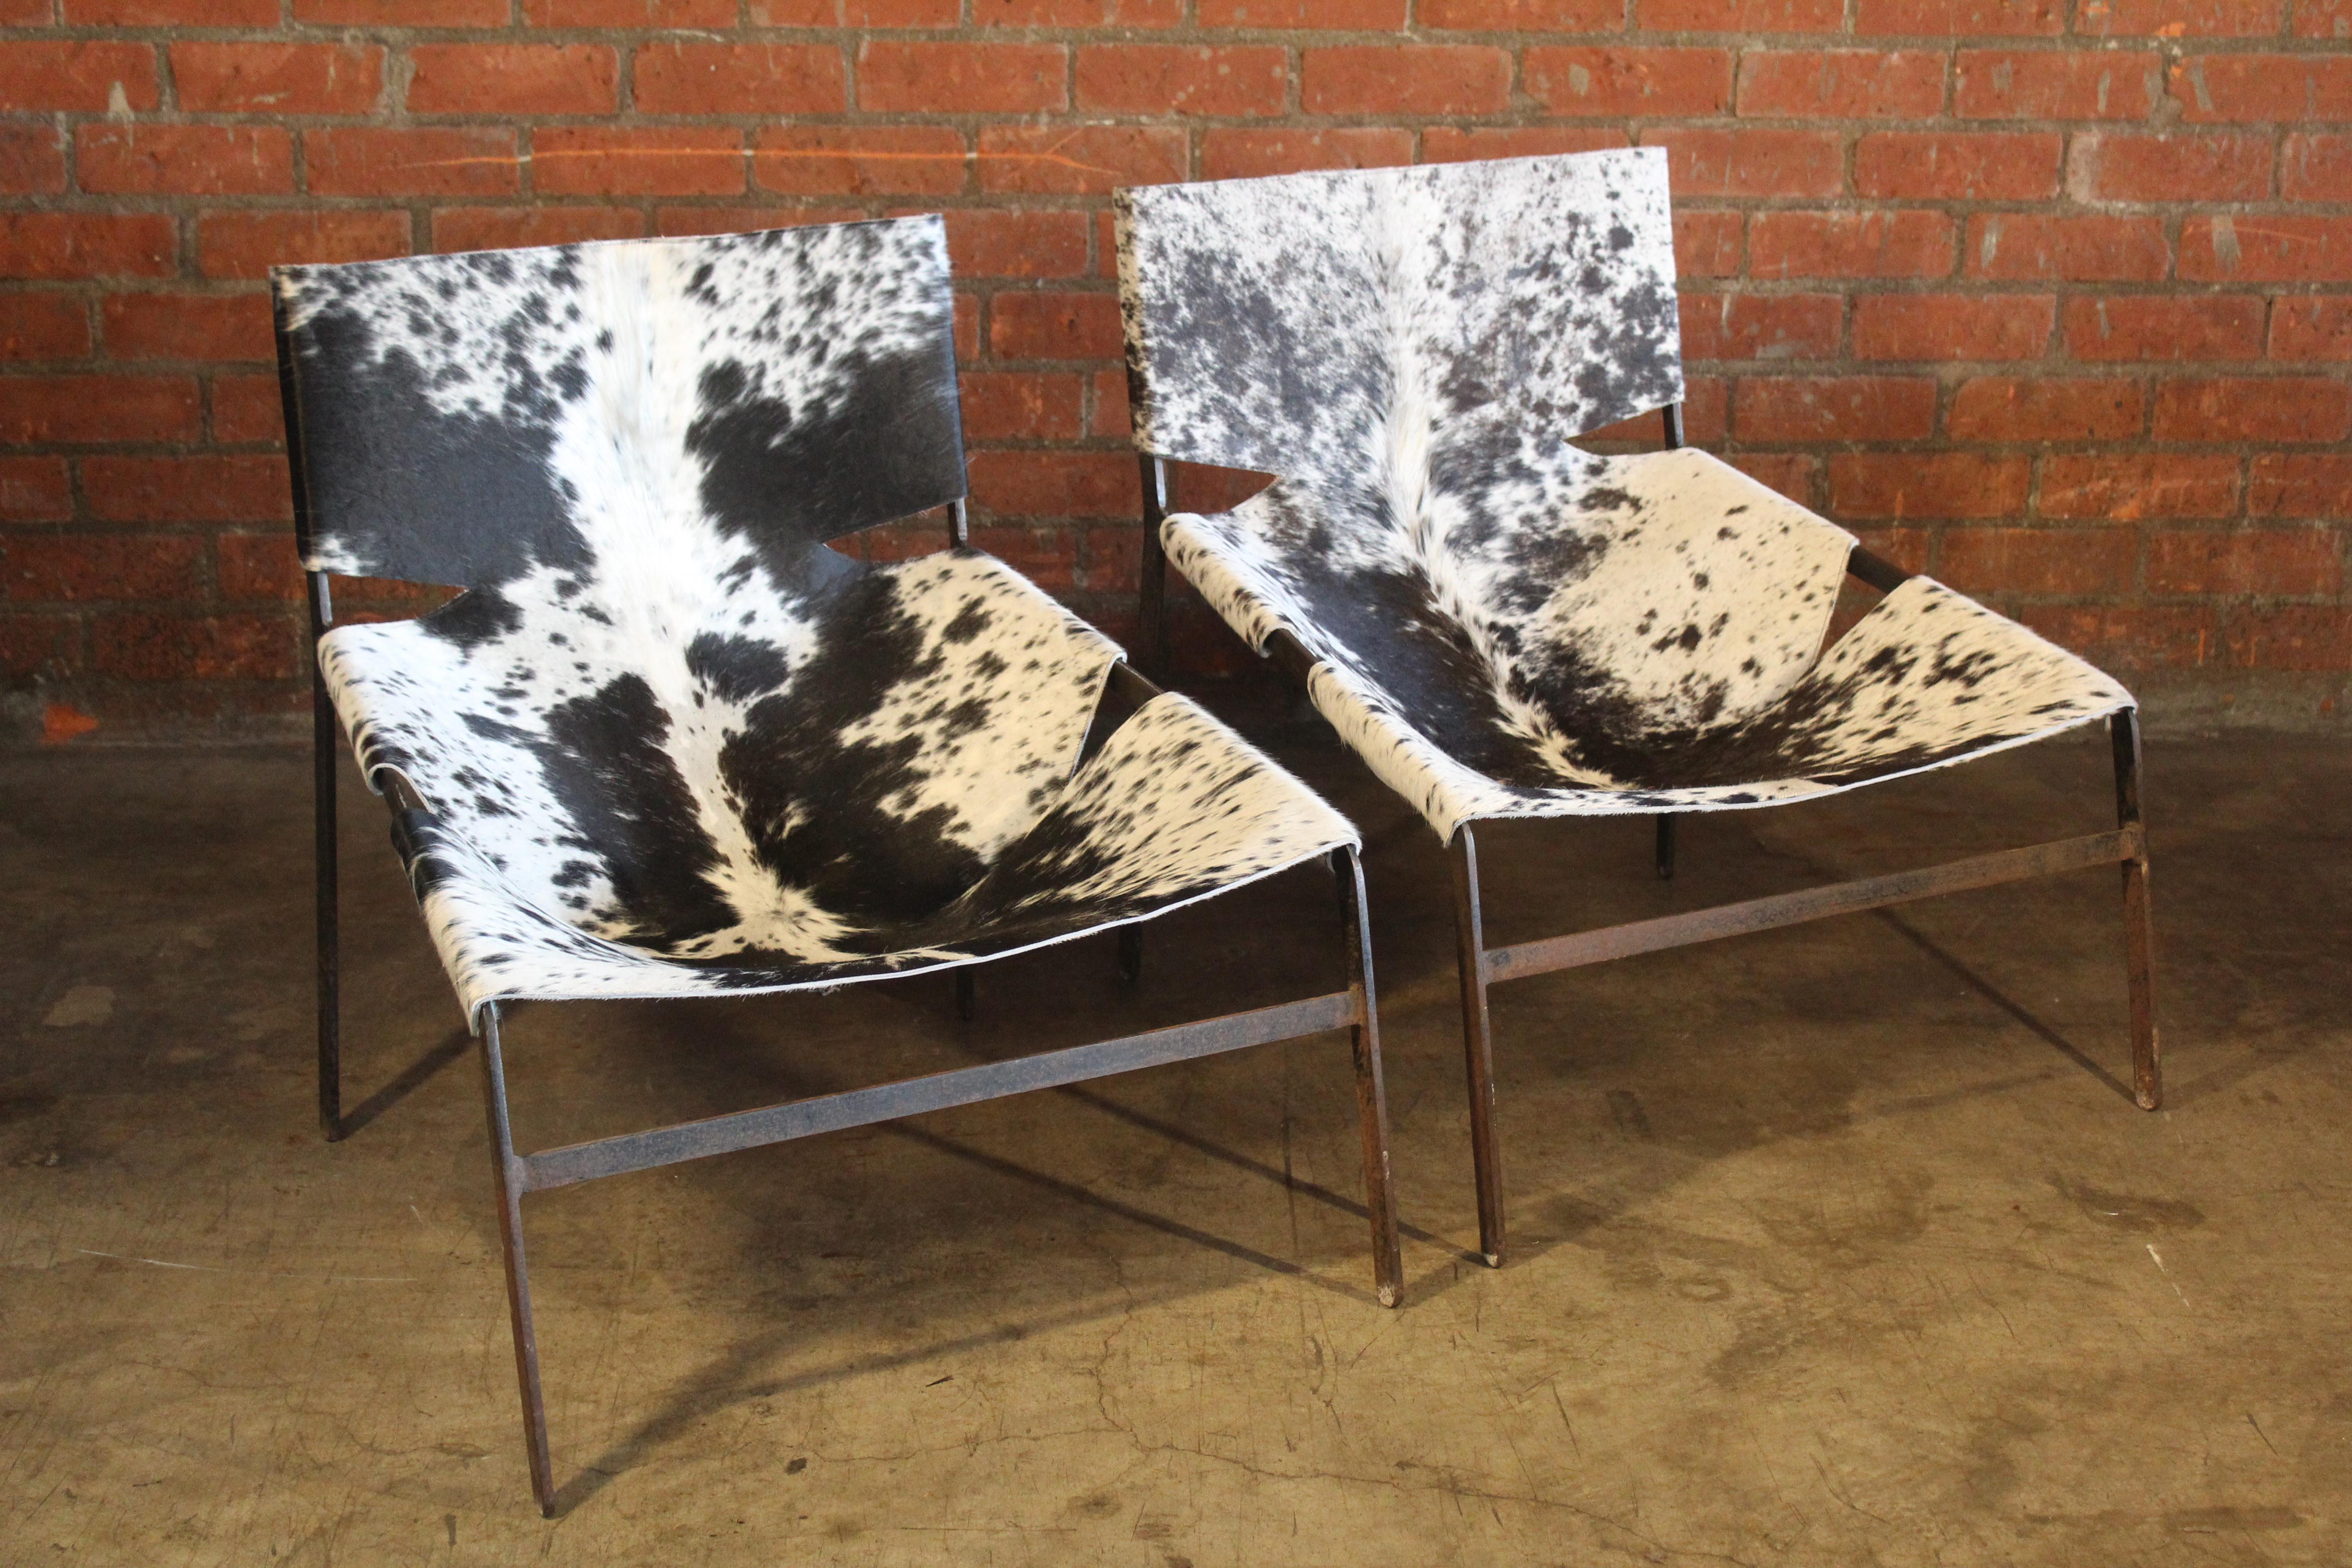 Pair of iron lounge chairs with new cowhide slings. The iron frames show patina. Unknown designer, attributed to Pierre Paulin. Most likely from Netherlands, 1960s.